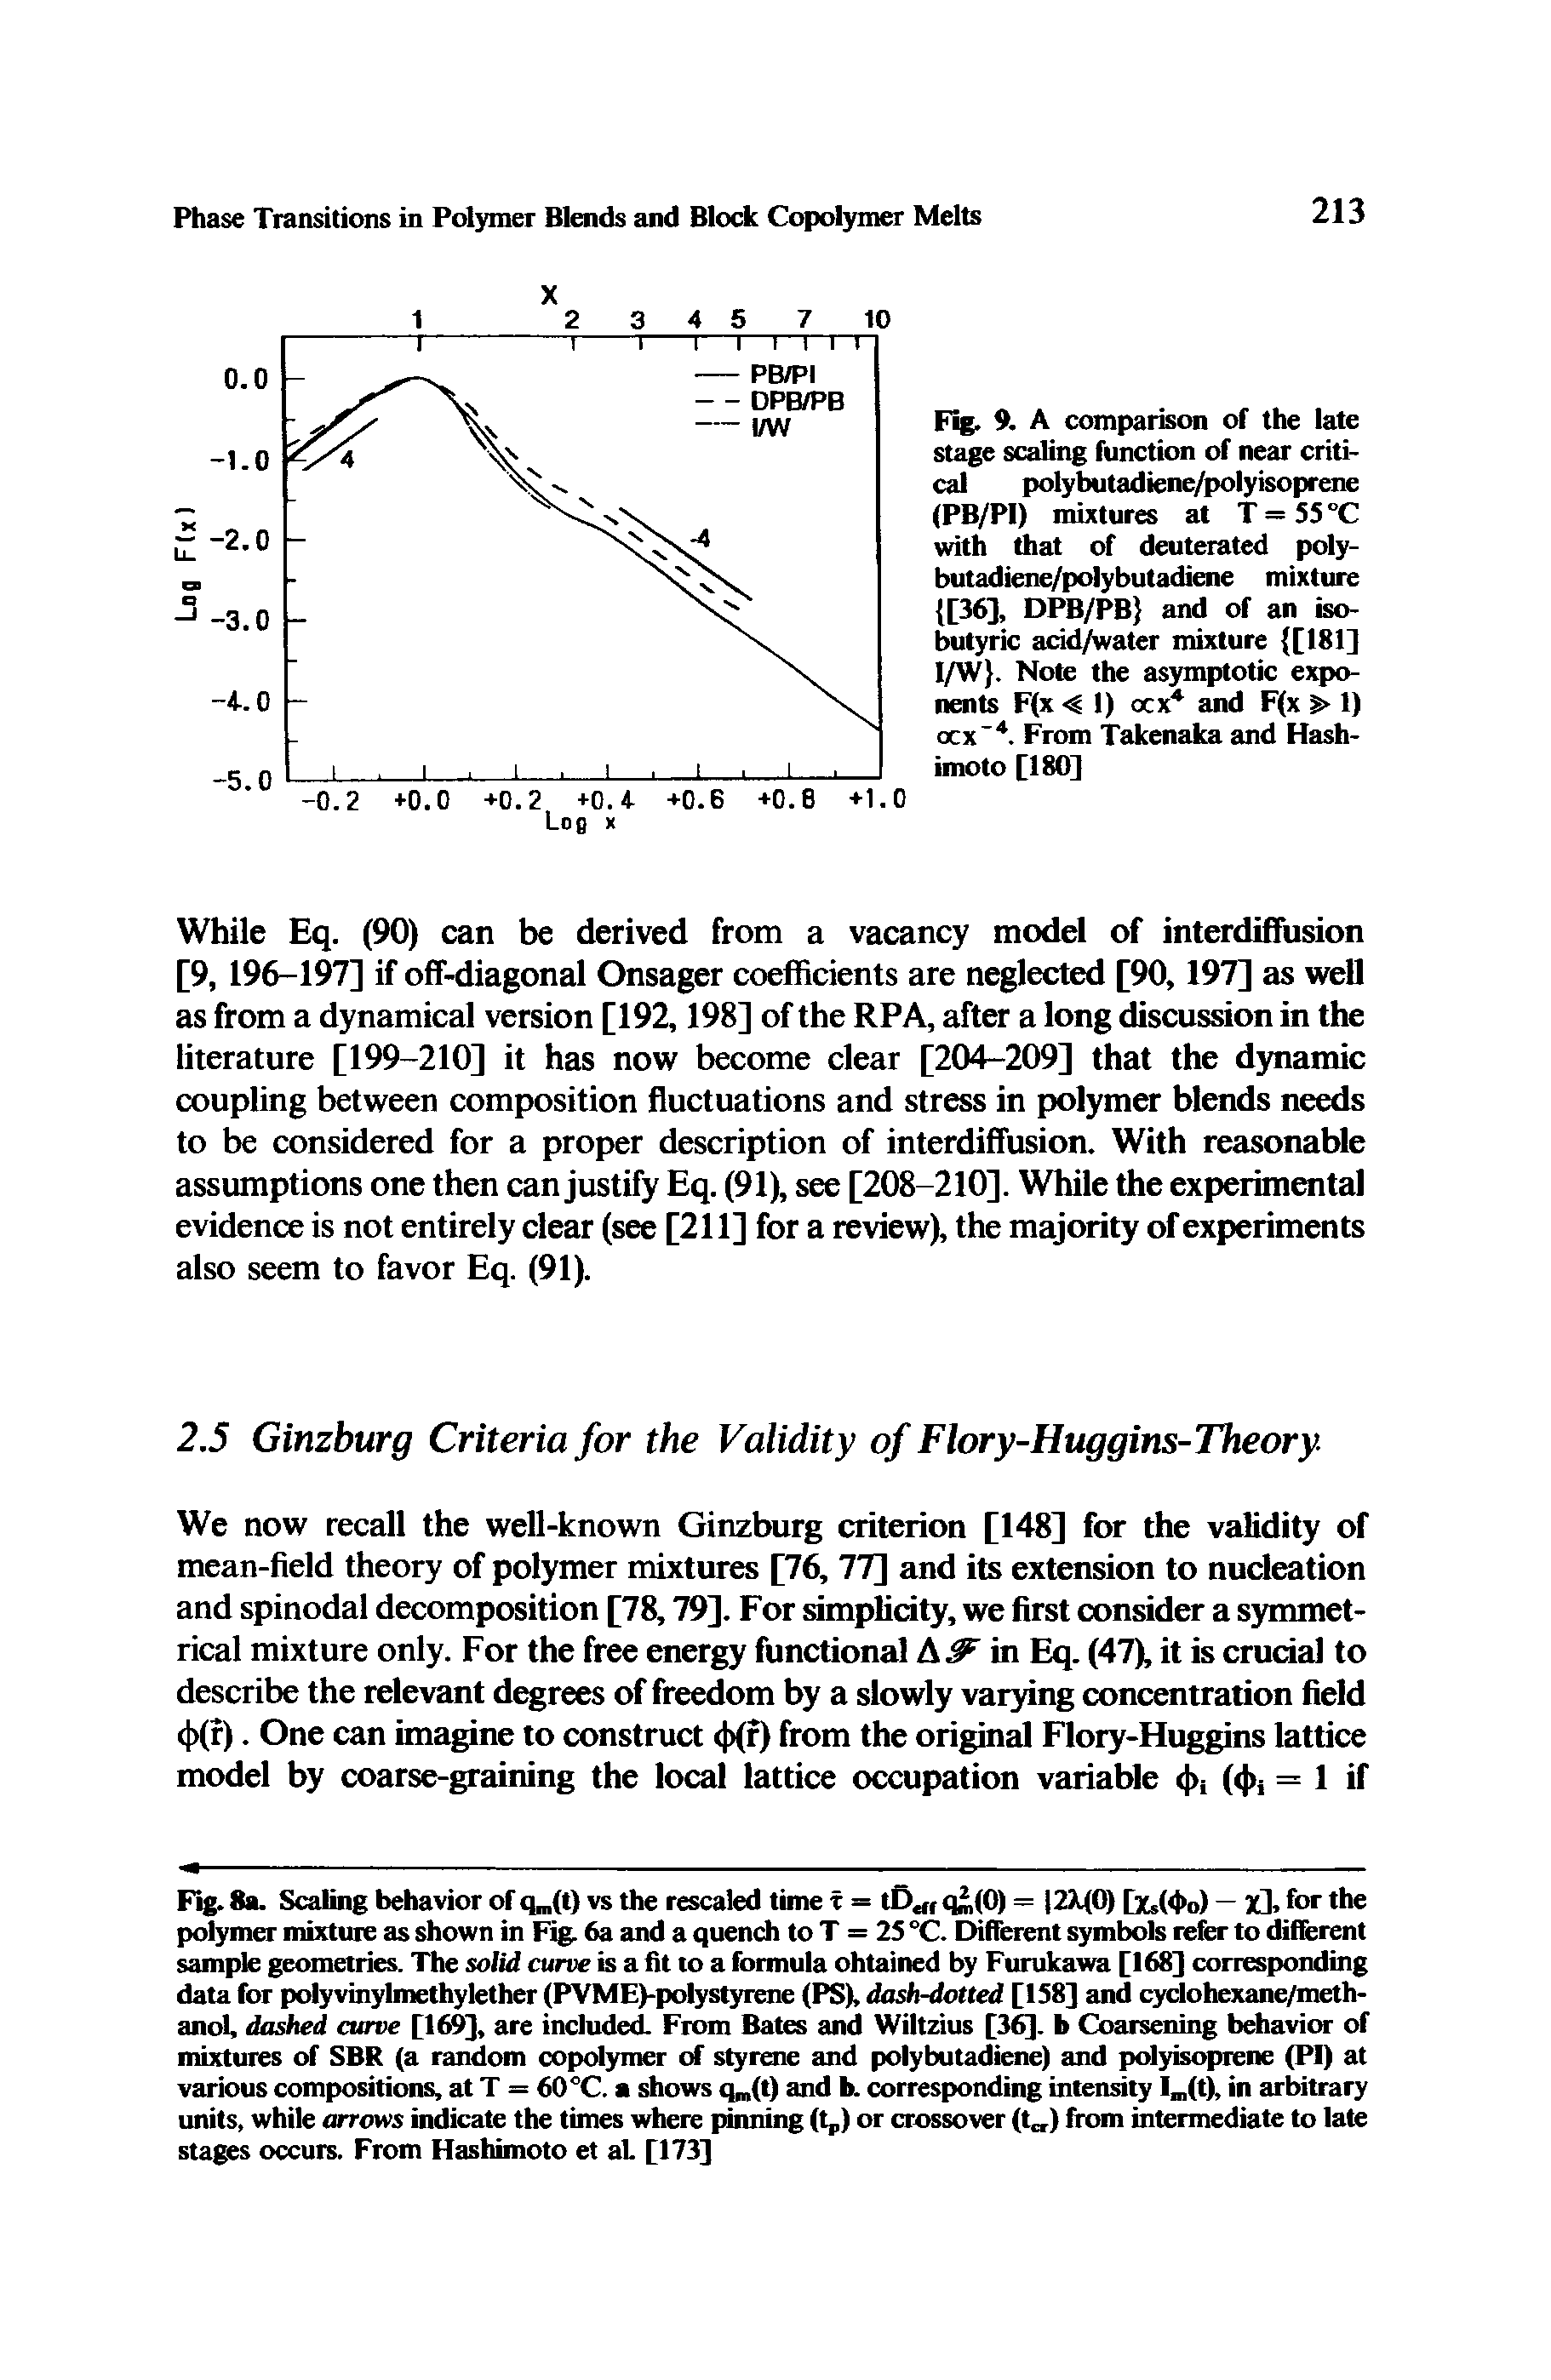 Fig. 9. A comparison of the late stage scaling function of near critical polybutadiene/polyisoprene (PB/PI) mixtures at T = 55 °C with that of deuterated poly-butadiene/polybutadiene mixture [36], DPB/PB and of an iso-butyric acid/water mixture [181] I/W. Note the asymptotic exponents F(x < 1) ocx and F(x > 1) ocx-4. From Takenaka and Hash-imoto [180]...